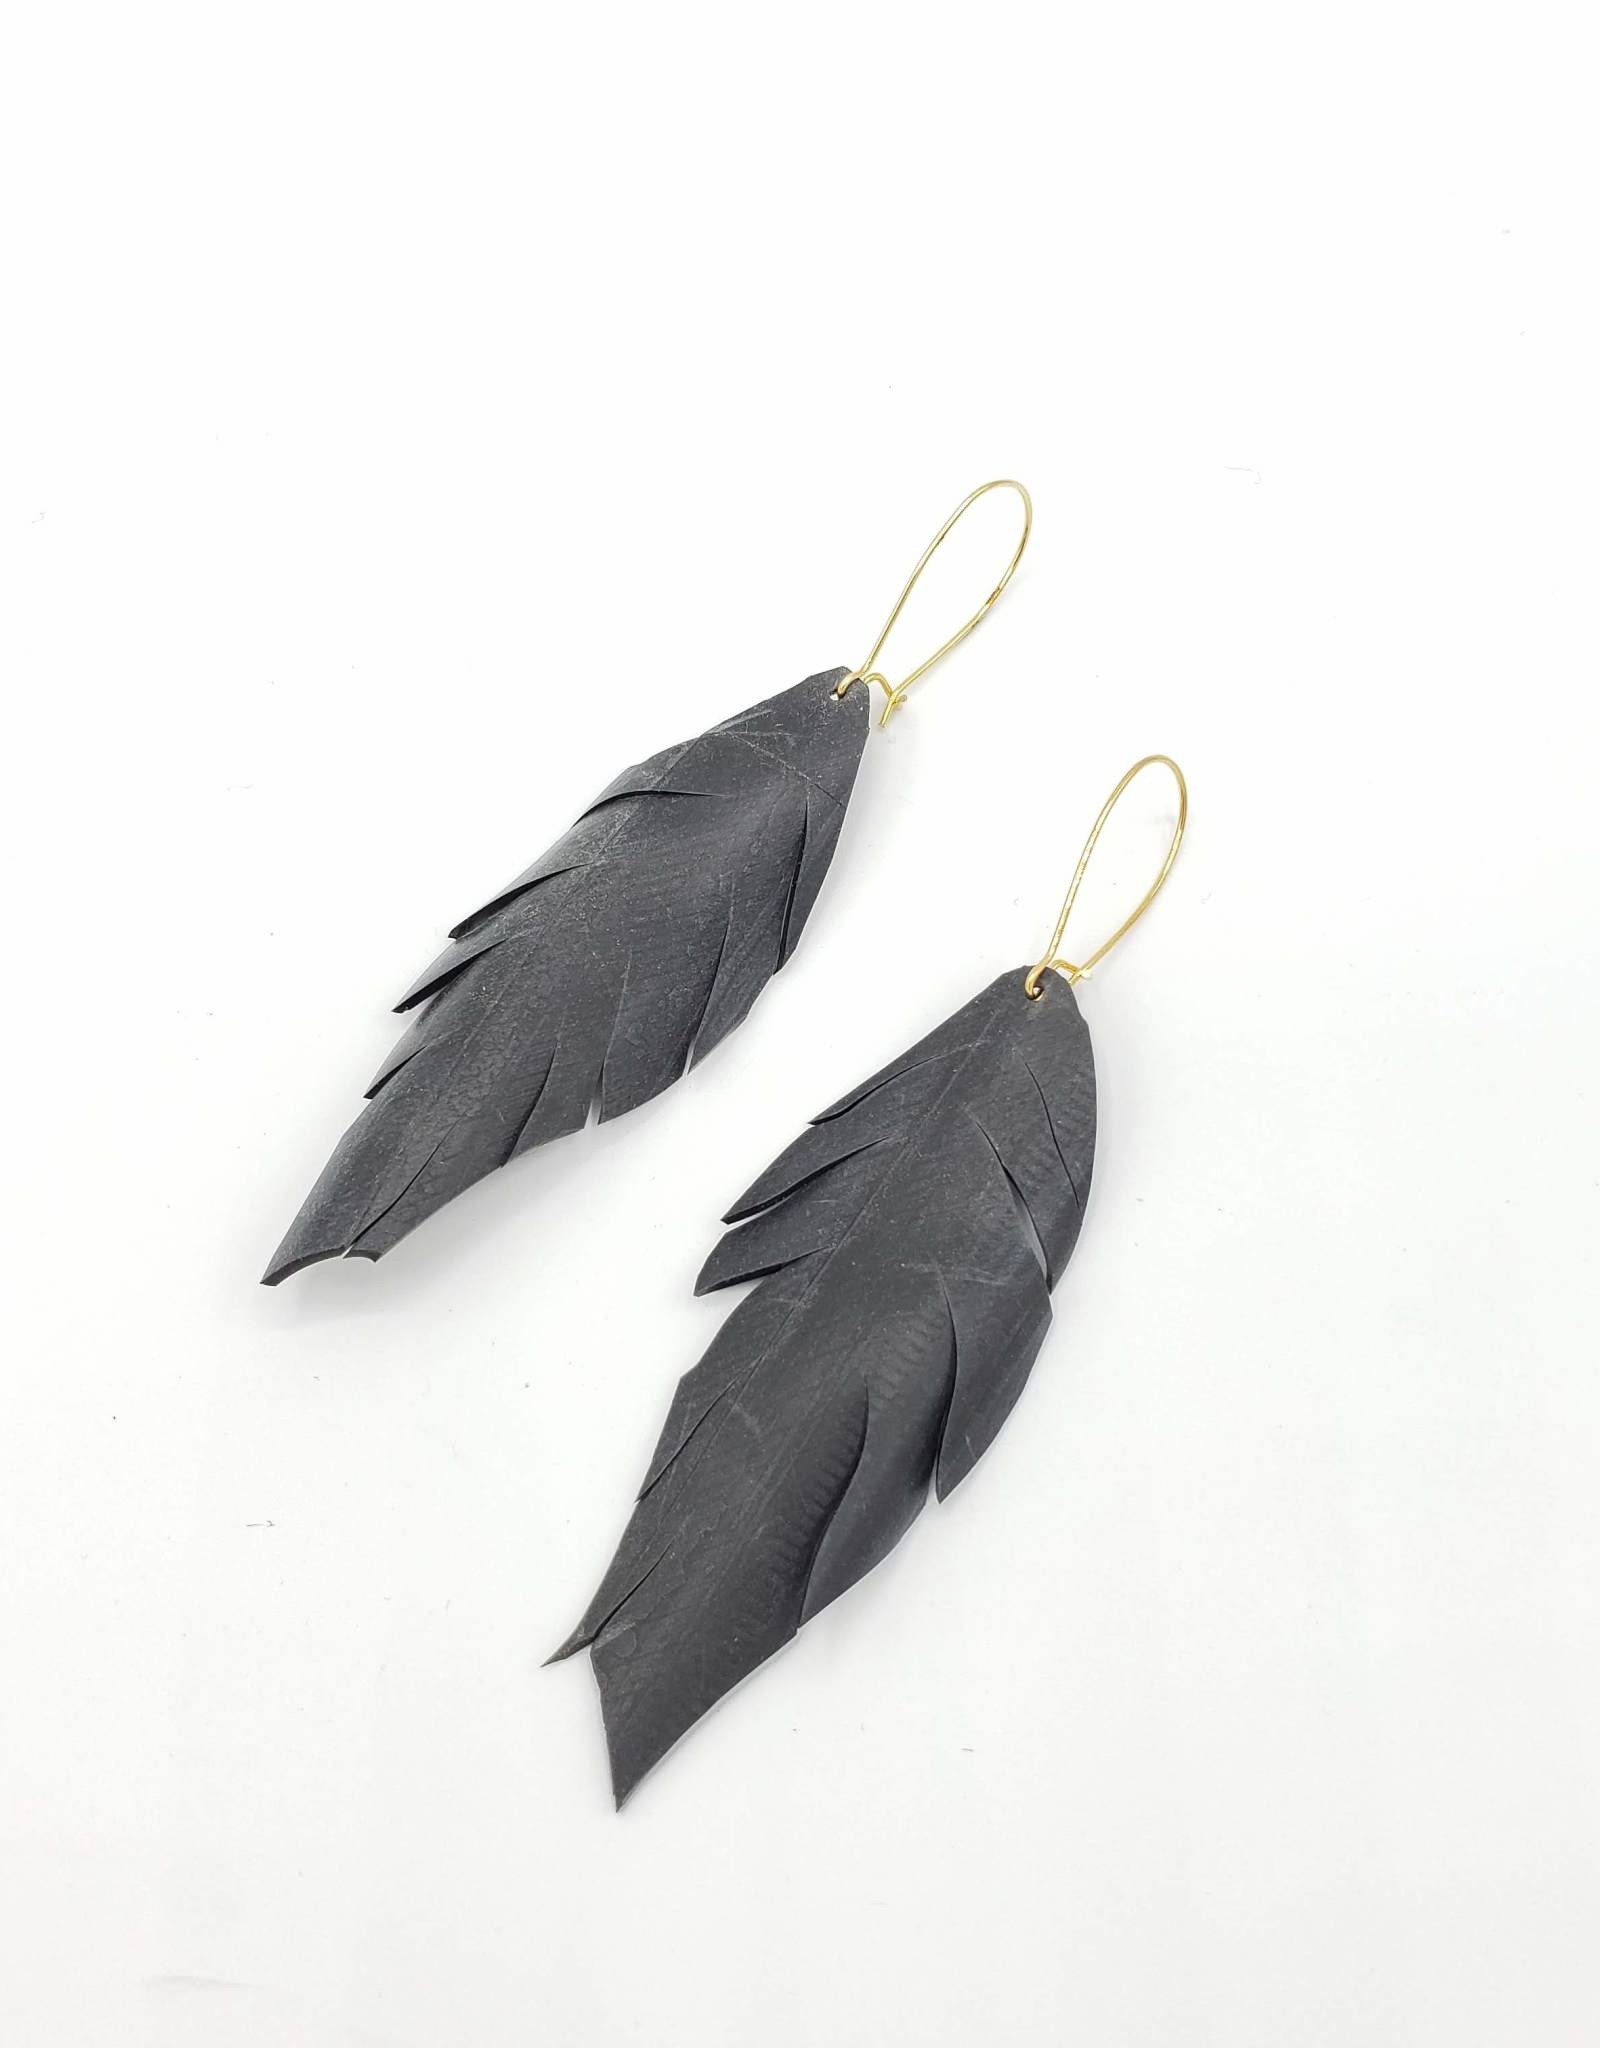 Redux Recycled Bike Tire Feather Earrings